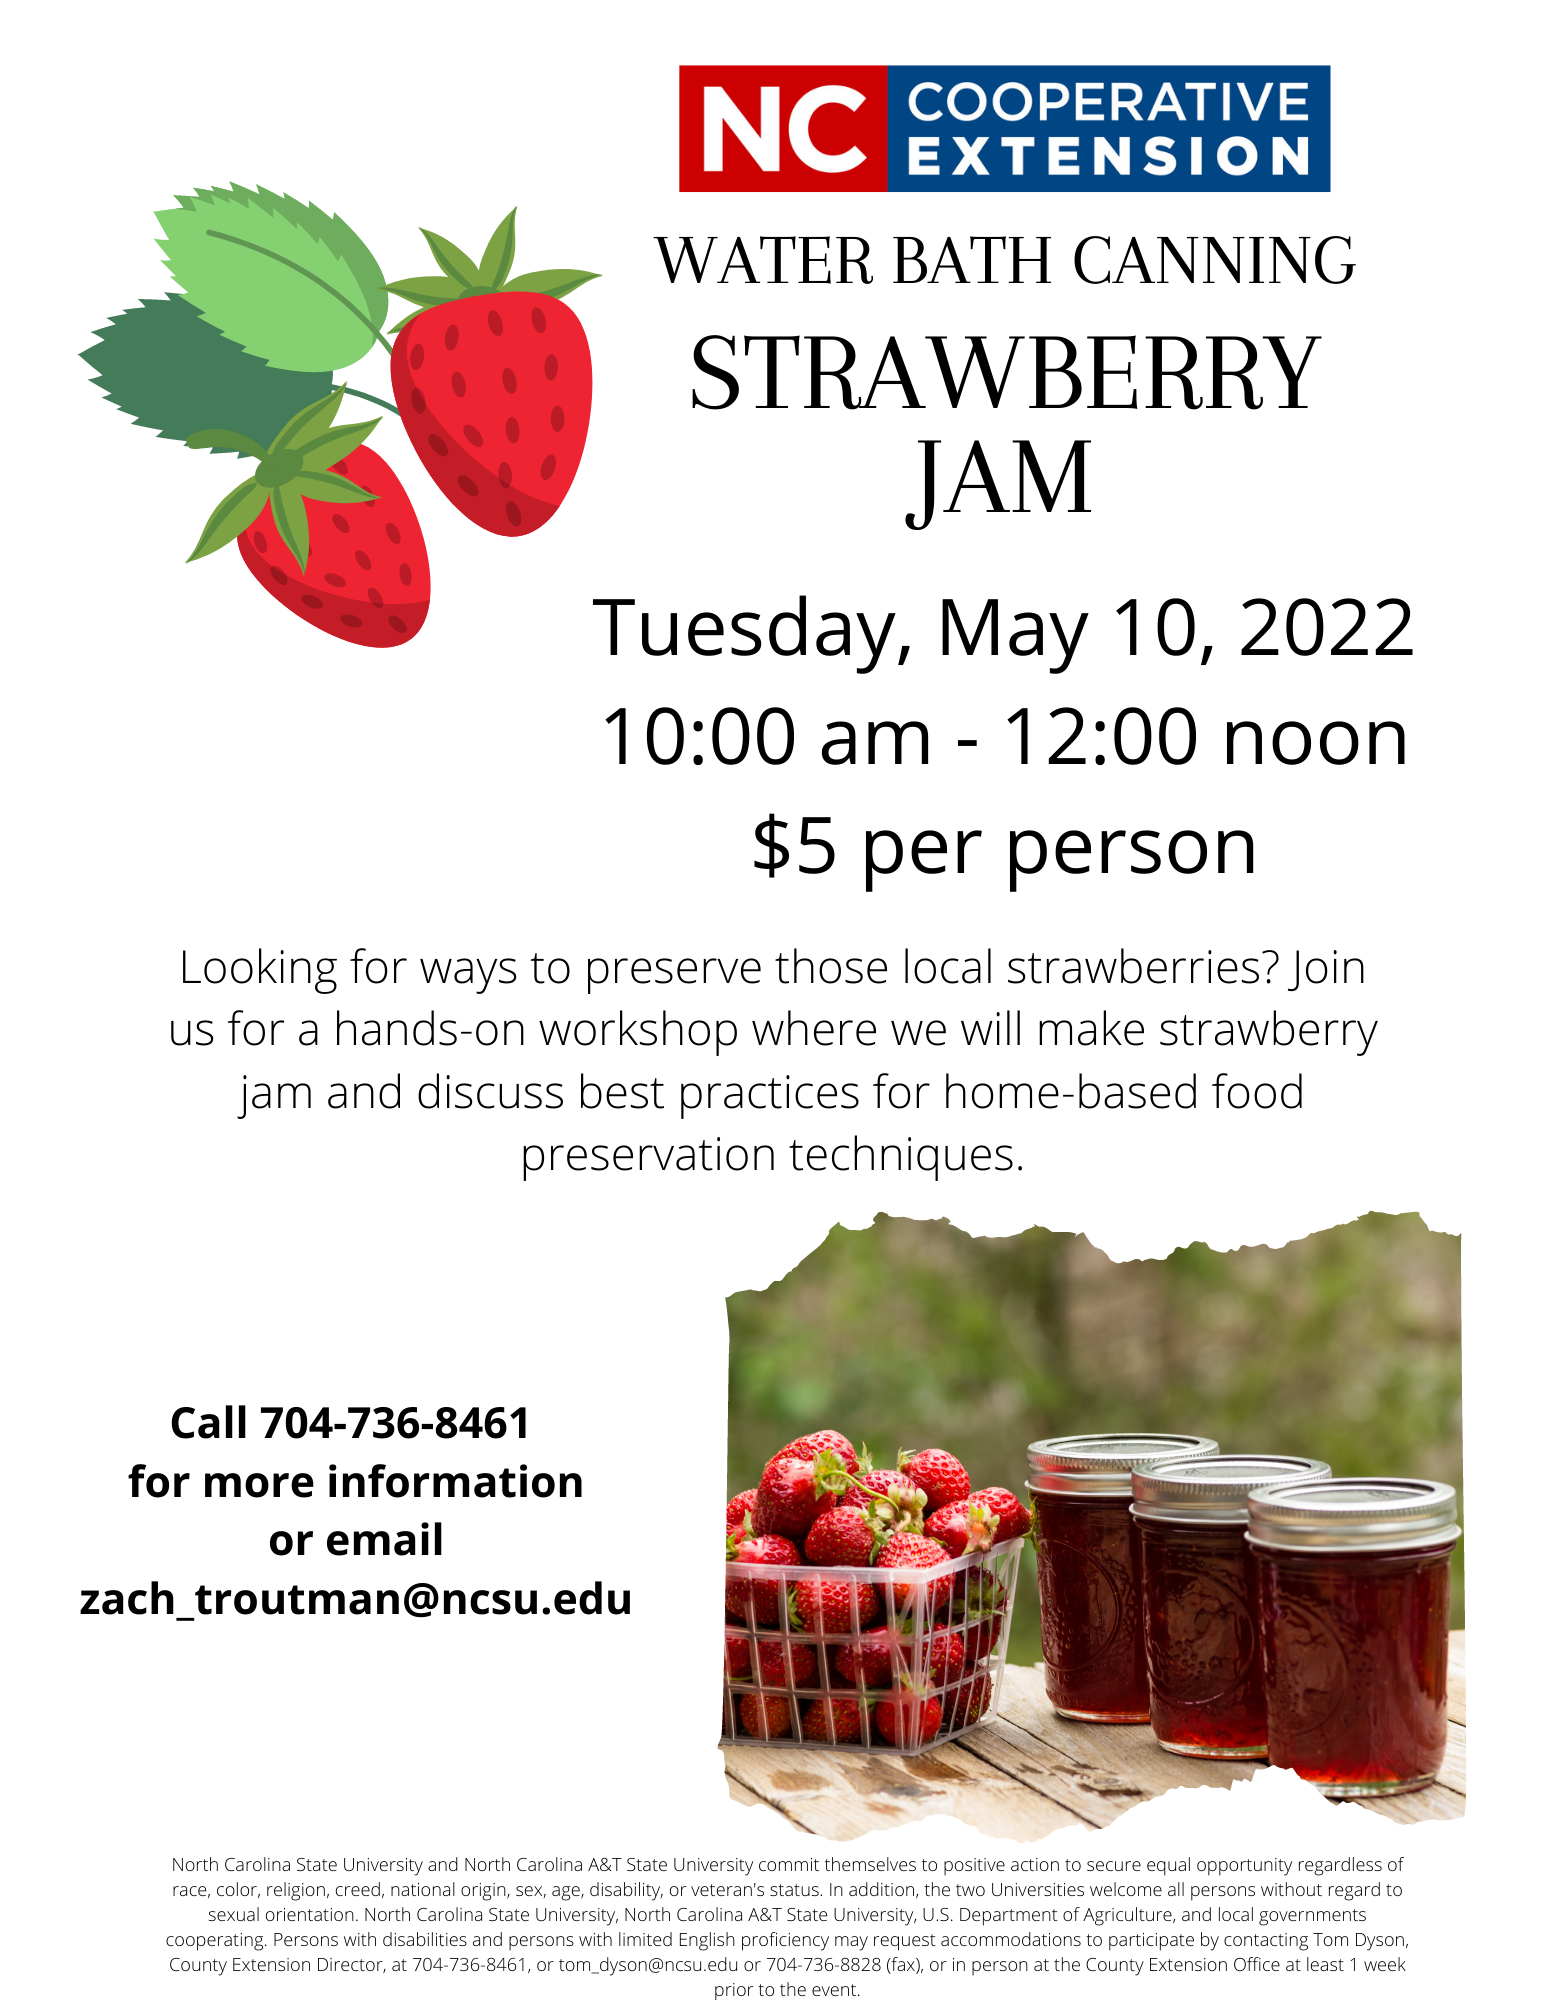 Water bath canning, Strawberry Jam. Tuesday, May 10, 2022. 10:00 a.m. - 12:00 noon. $5 per person. Looking for ways to rpeserve those local strawberries? Join us for a hands-on workshop where we will make strawberry jam and discuss best practices for home-based food preservation techniques. Call 704-736-8461 for more information or email zach_troutman@ncsu.edu. 